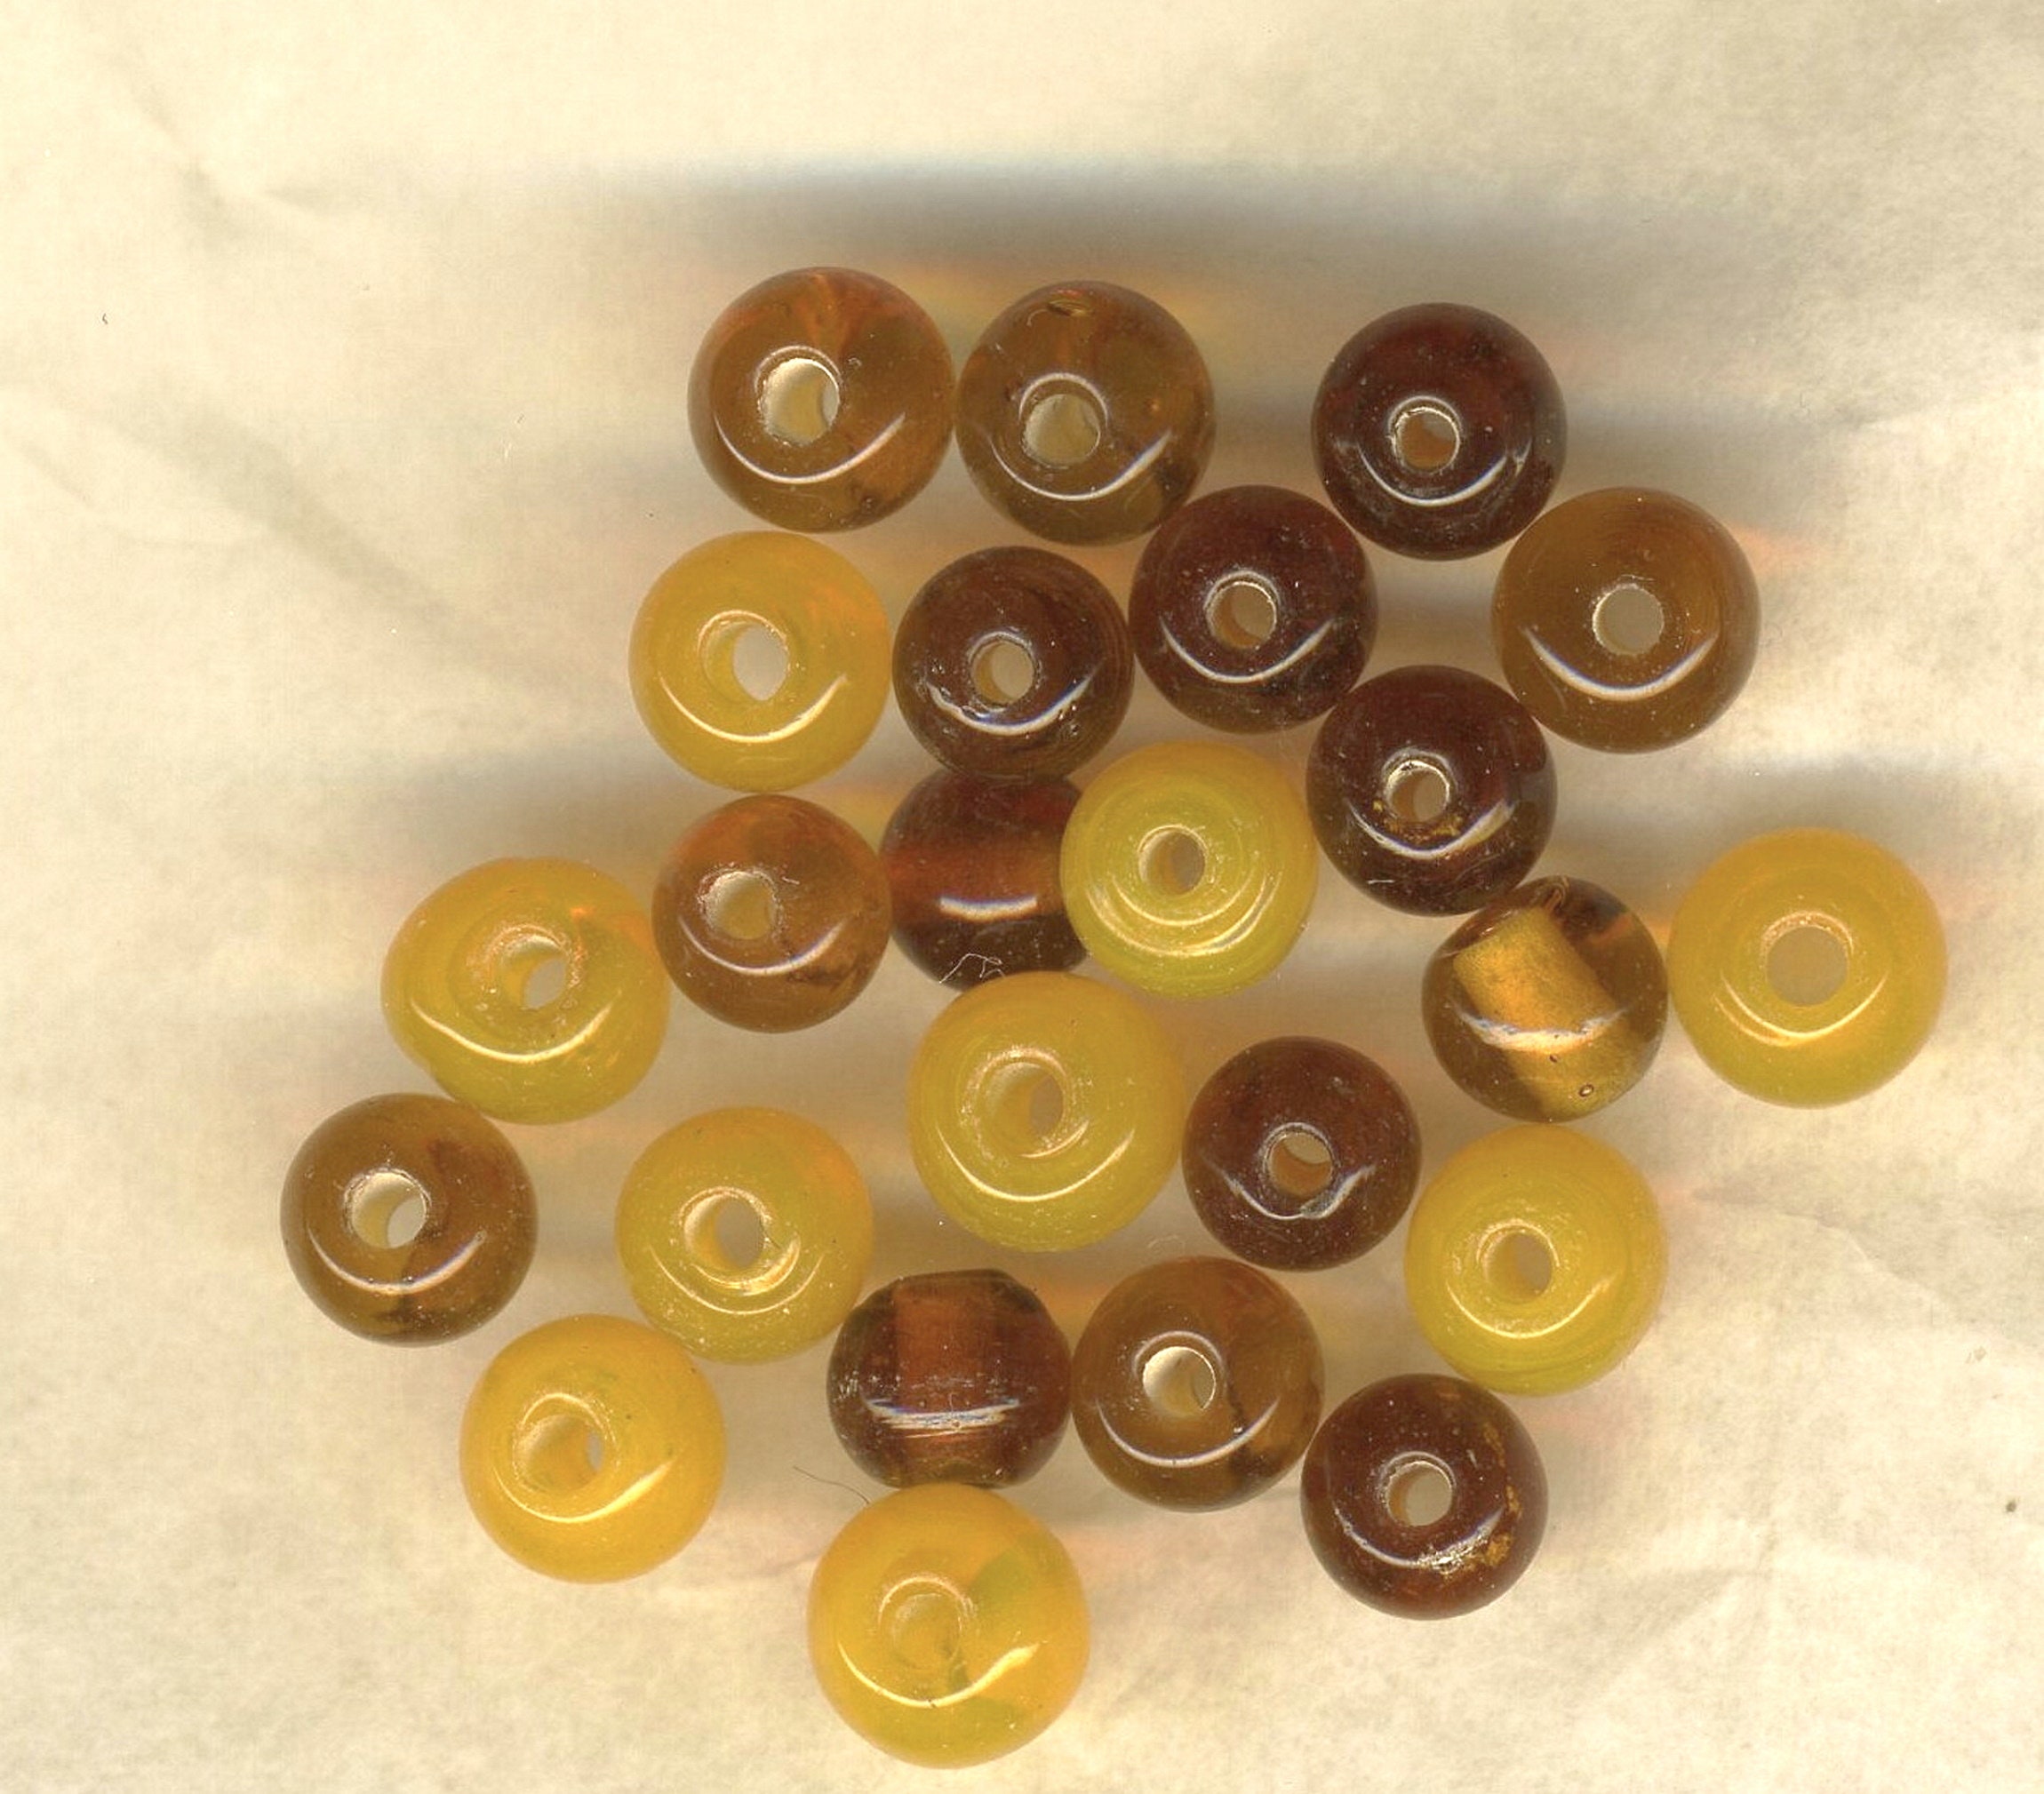 Algebraisk Under ~ pålidelighed Glass Beads in Amber Color and Topaz in Mixture 20 Pieces of - Etsy